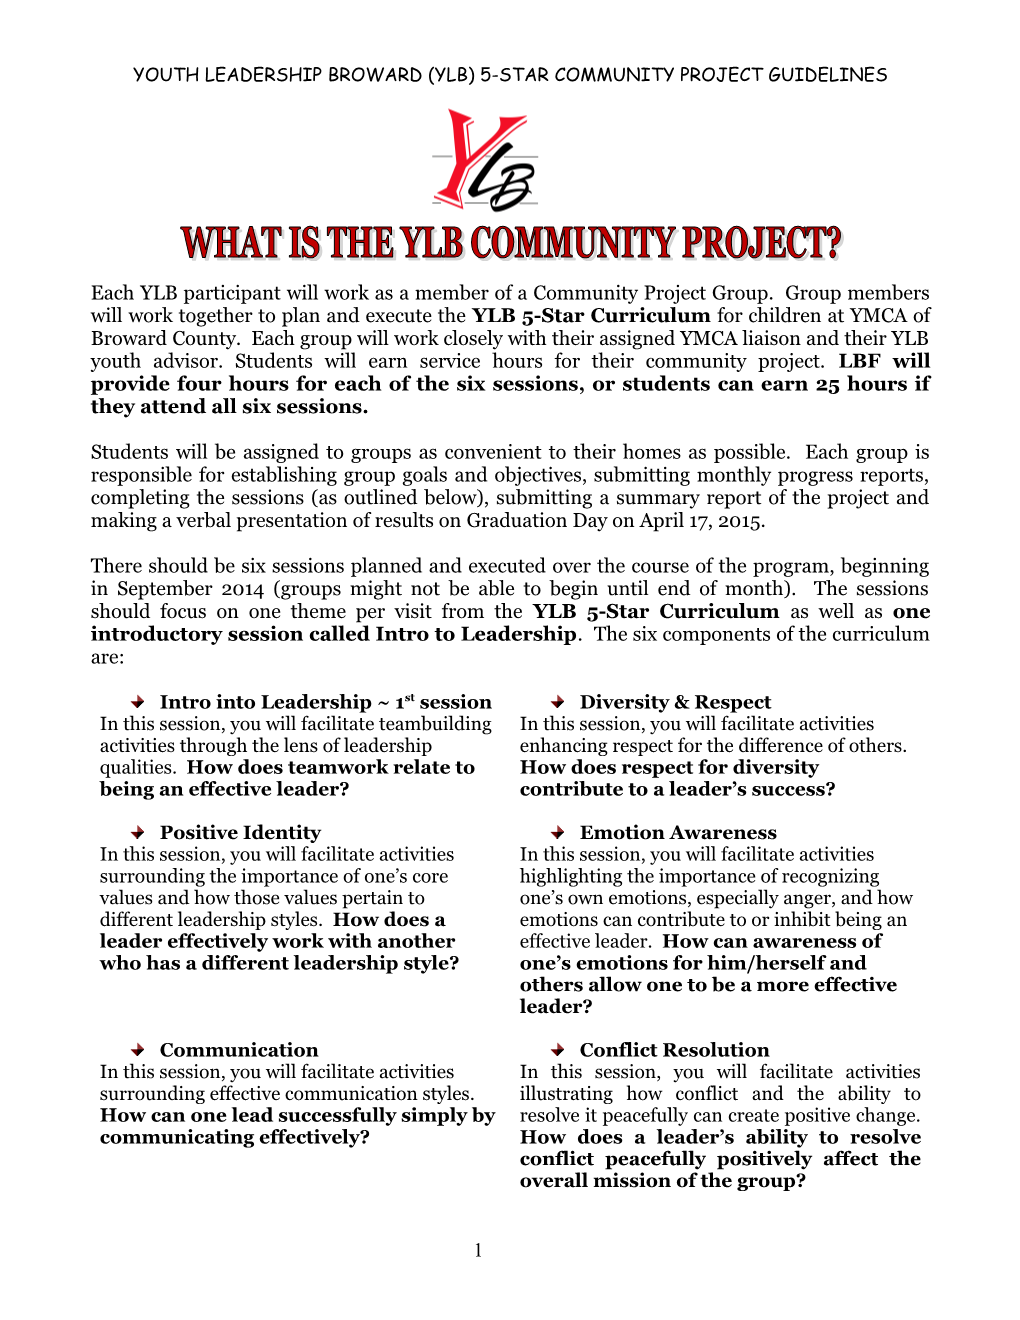 Youth Leadership Broward (Ylb) 5-Star Community Project Guidelines